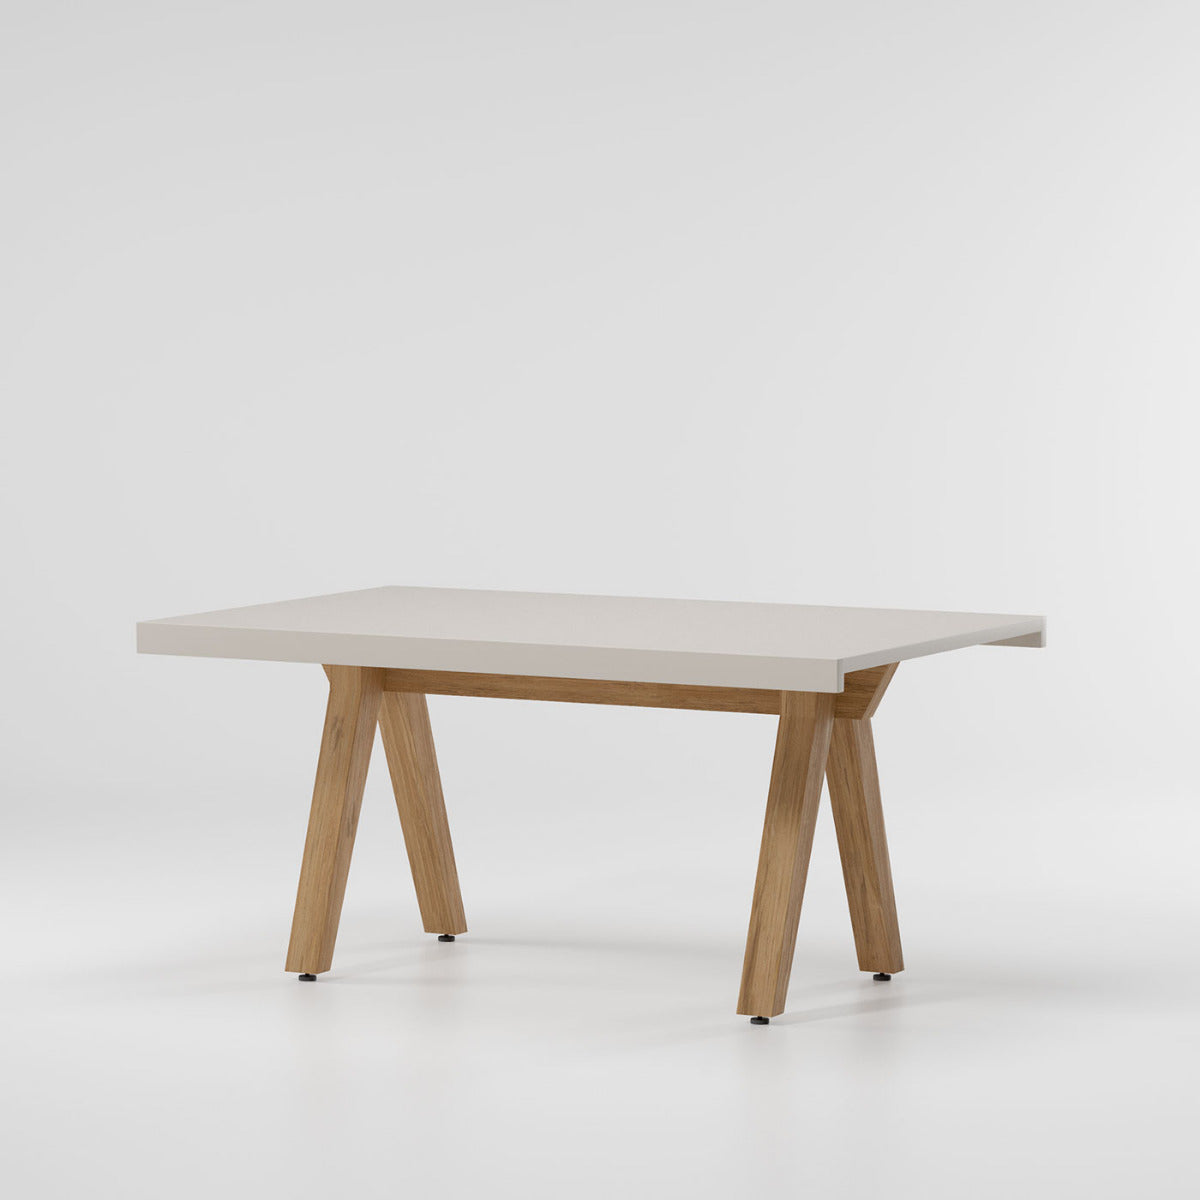 Kettal Vieques Dining Table / 6 Guests Teak Legs